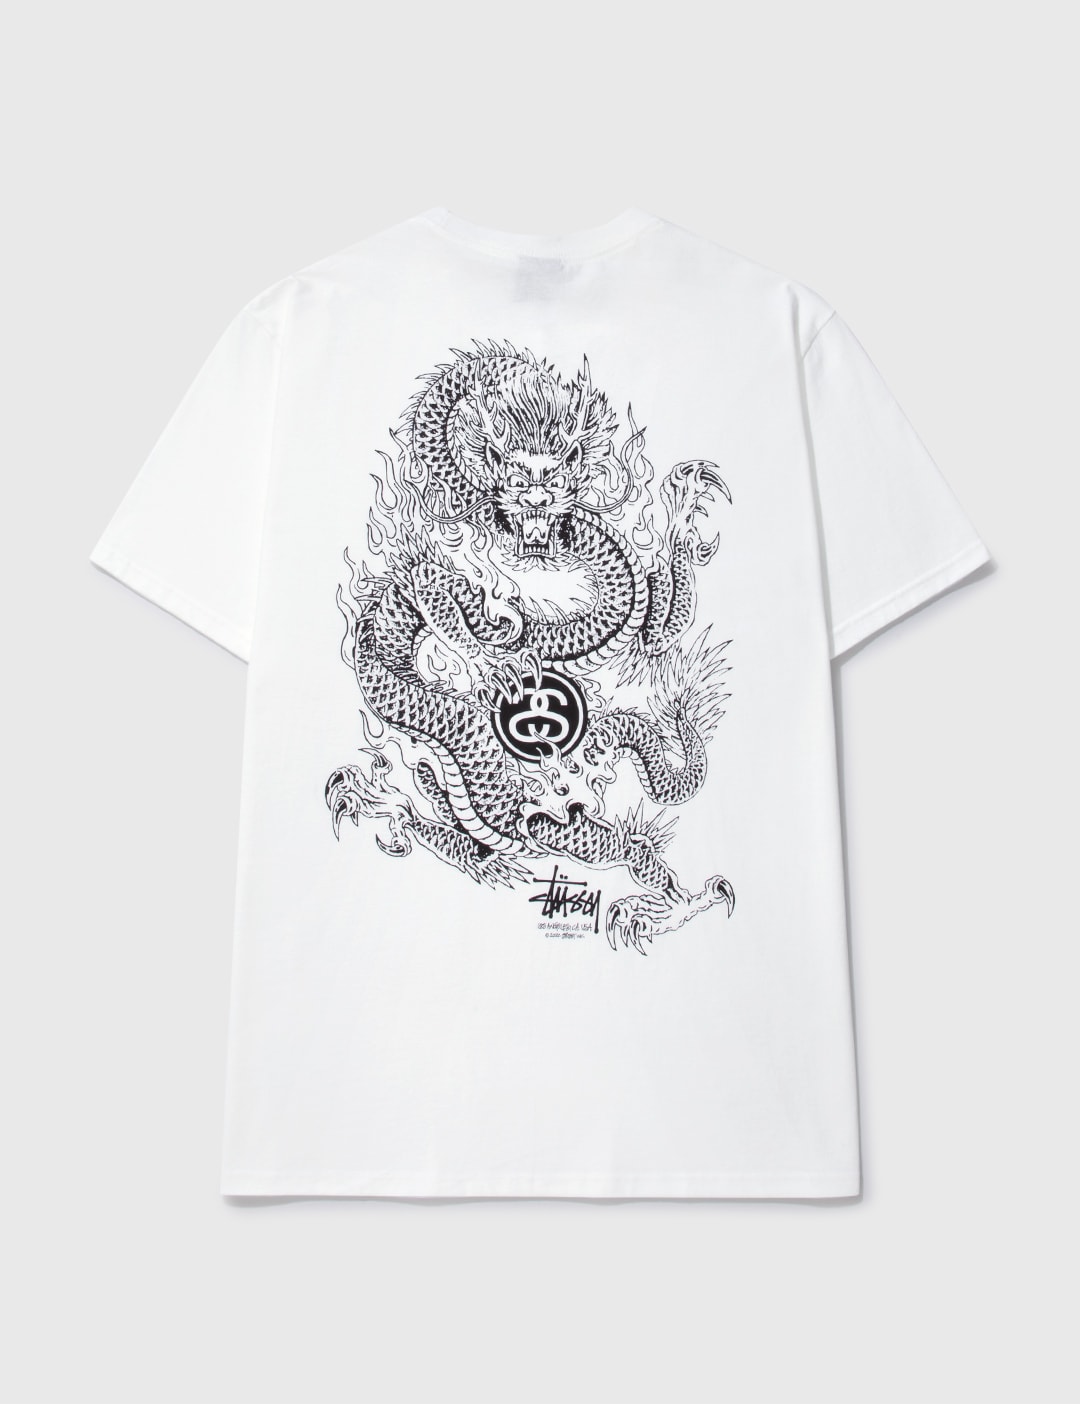 Stüssy - DRAGON T-SHIRT | HBX - Globally Curated Fashion and Lifestyle ...